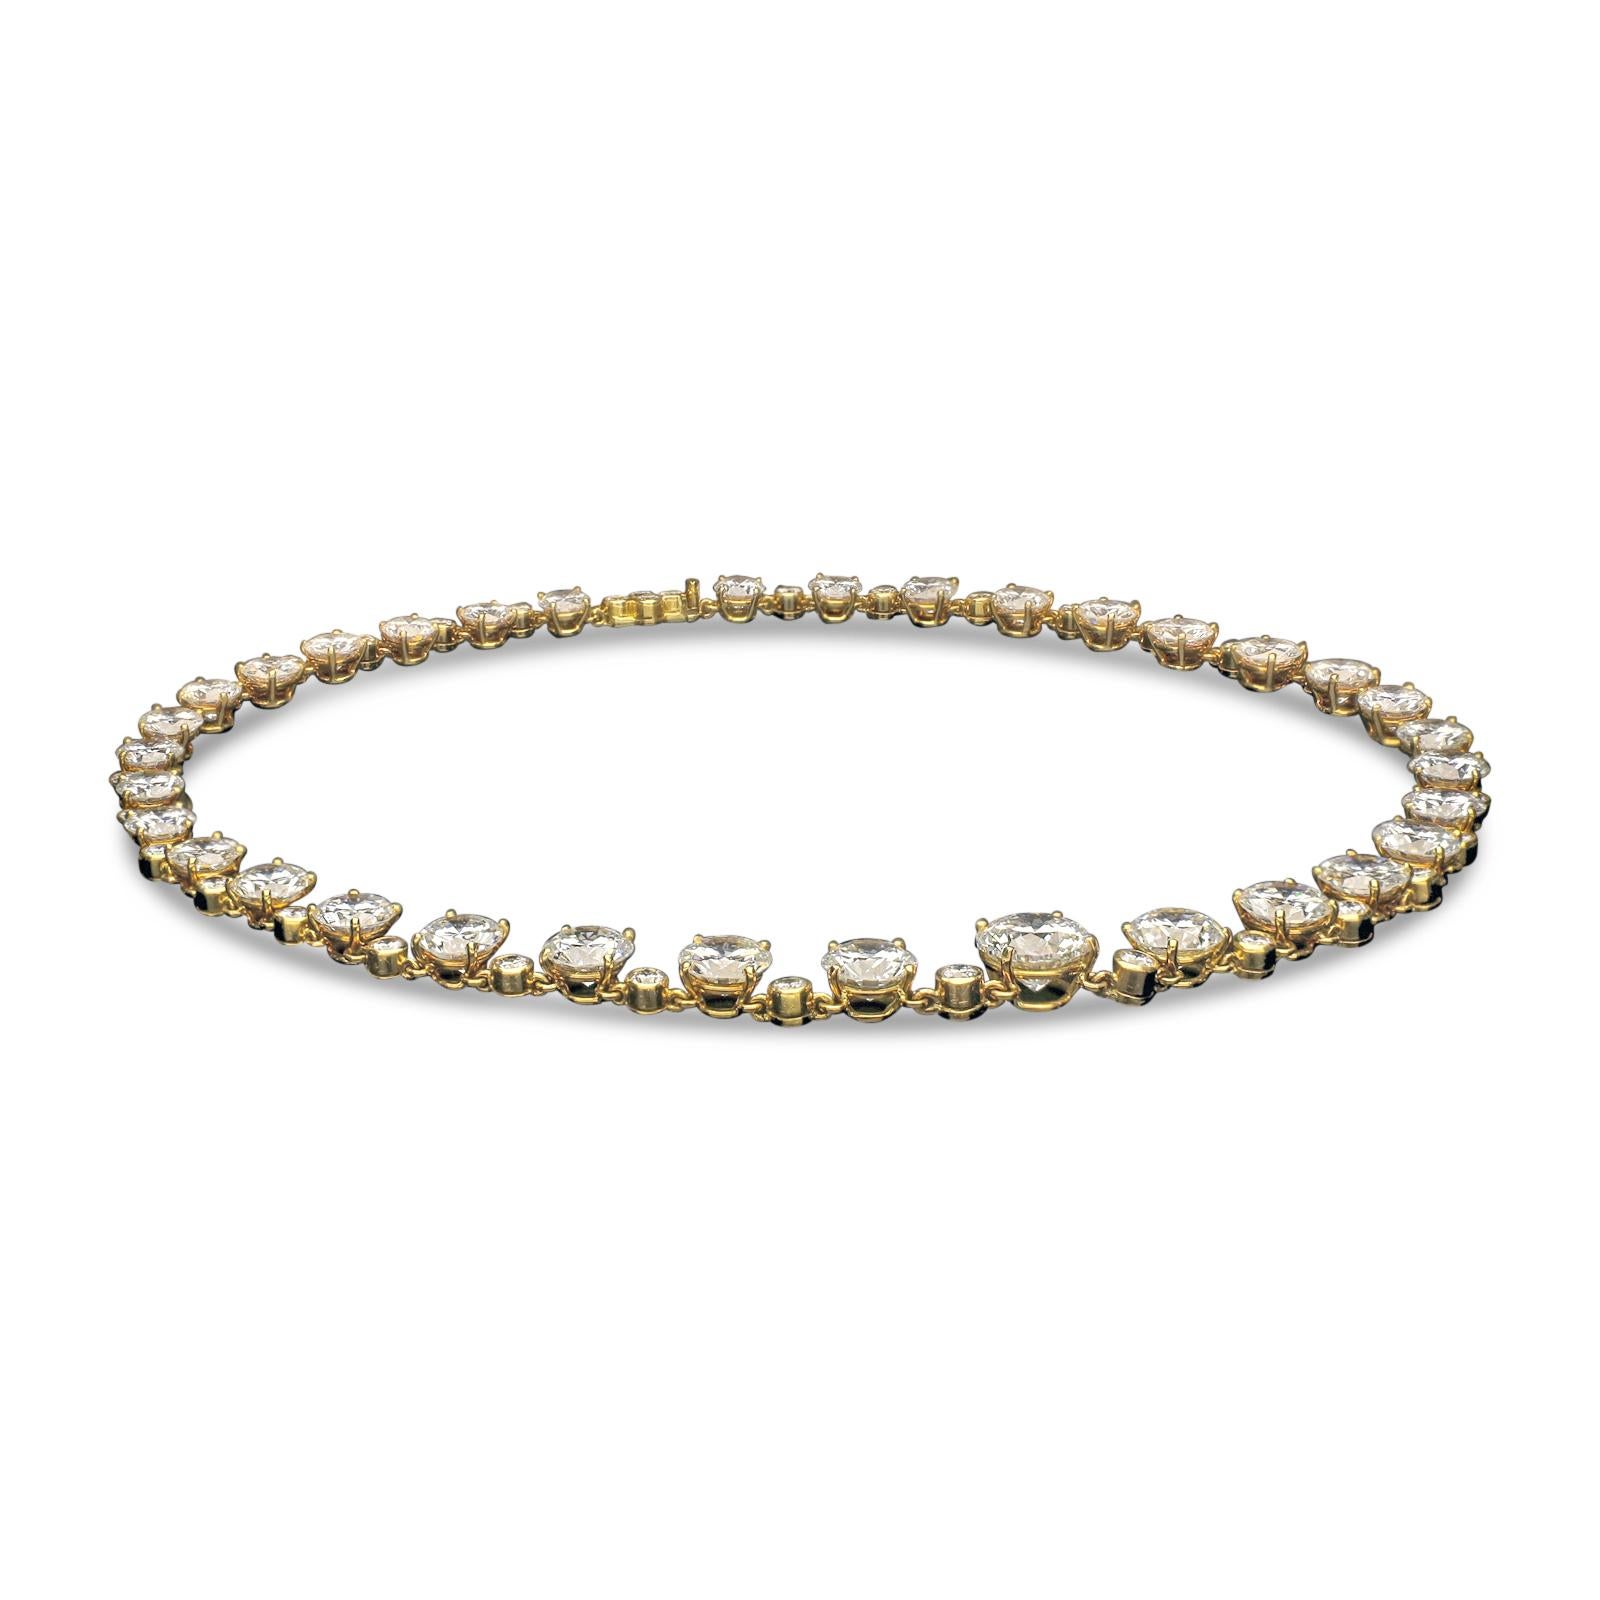 A stunning diamond riviere necklace by Asprey & Co. 1962, composed of thirty four round brilliant cut diamonds ranging from 0.61ct to 3.01ct and weighing a combined total of 37.79cts and of D-H colour and VVS1-SI1 clarity, in claw settings and